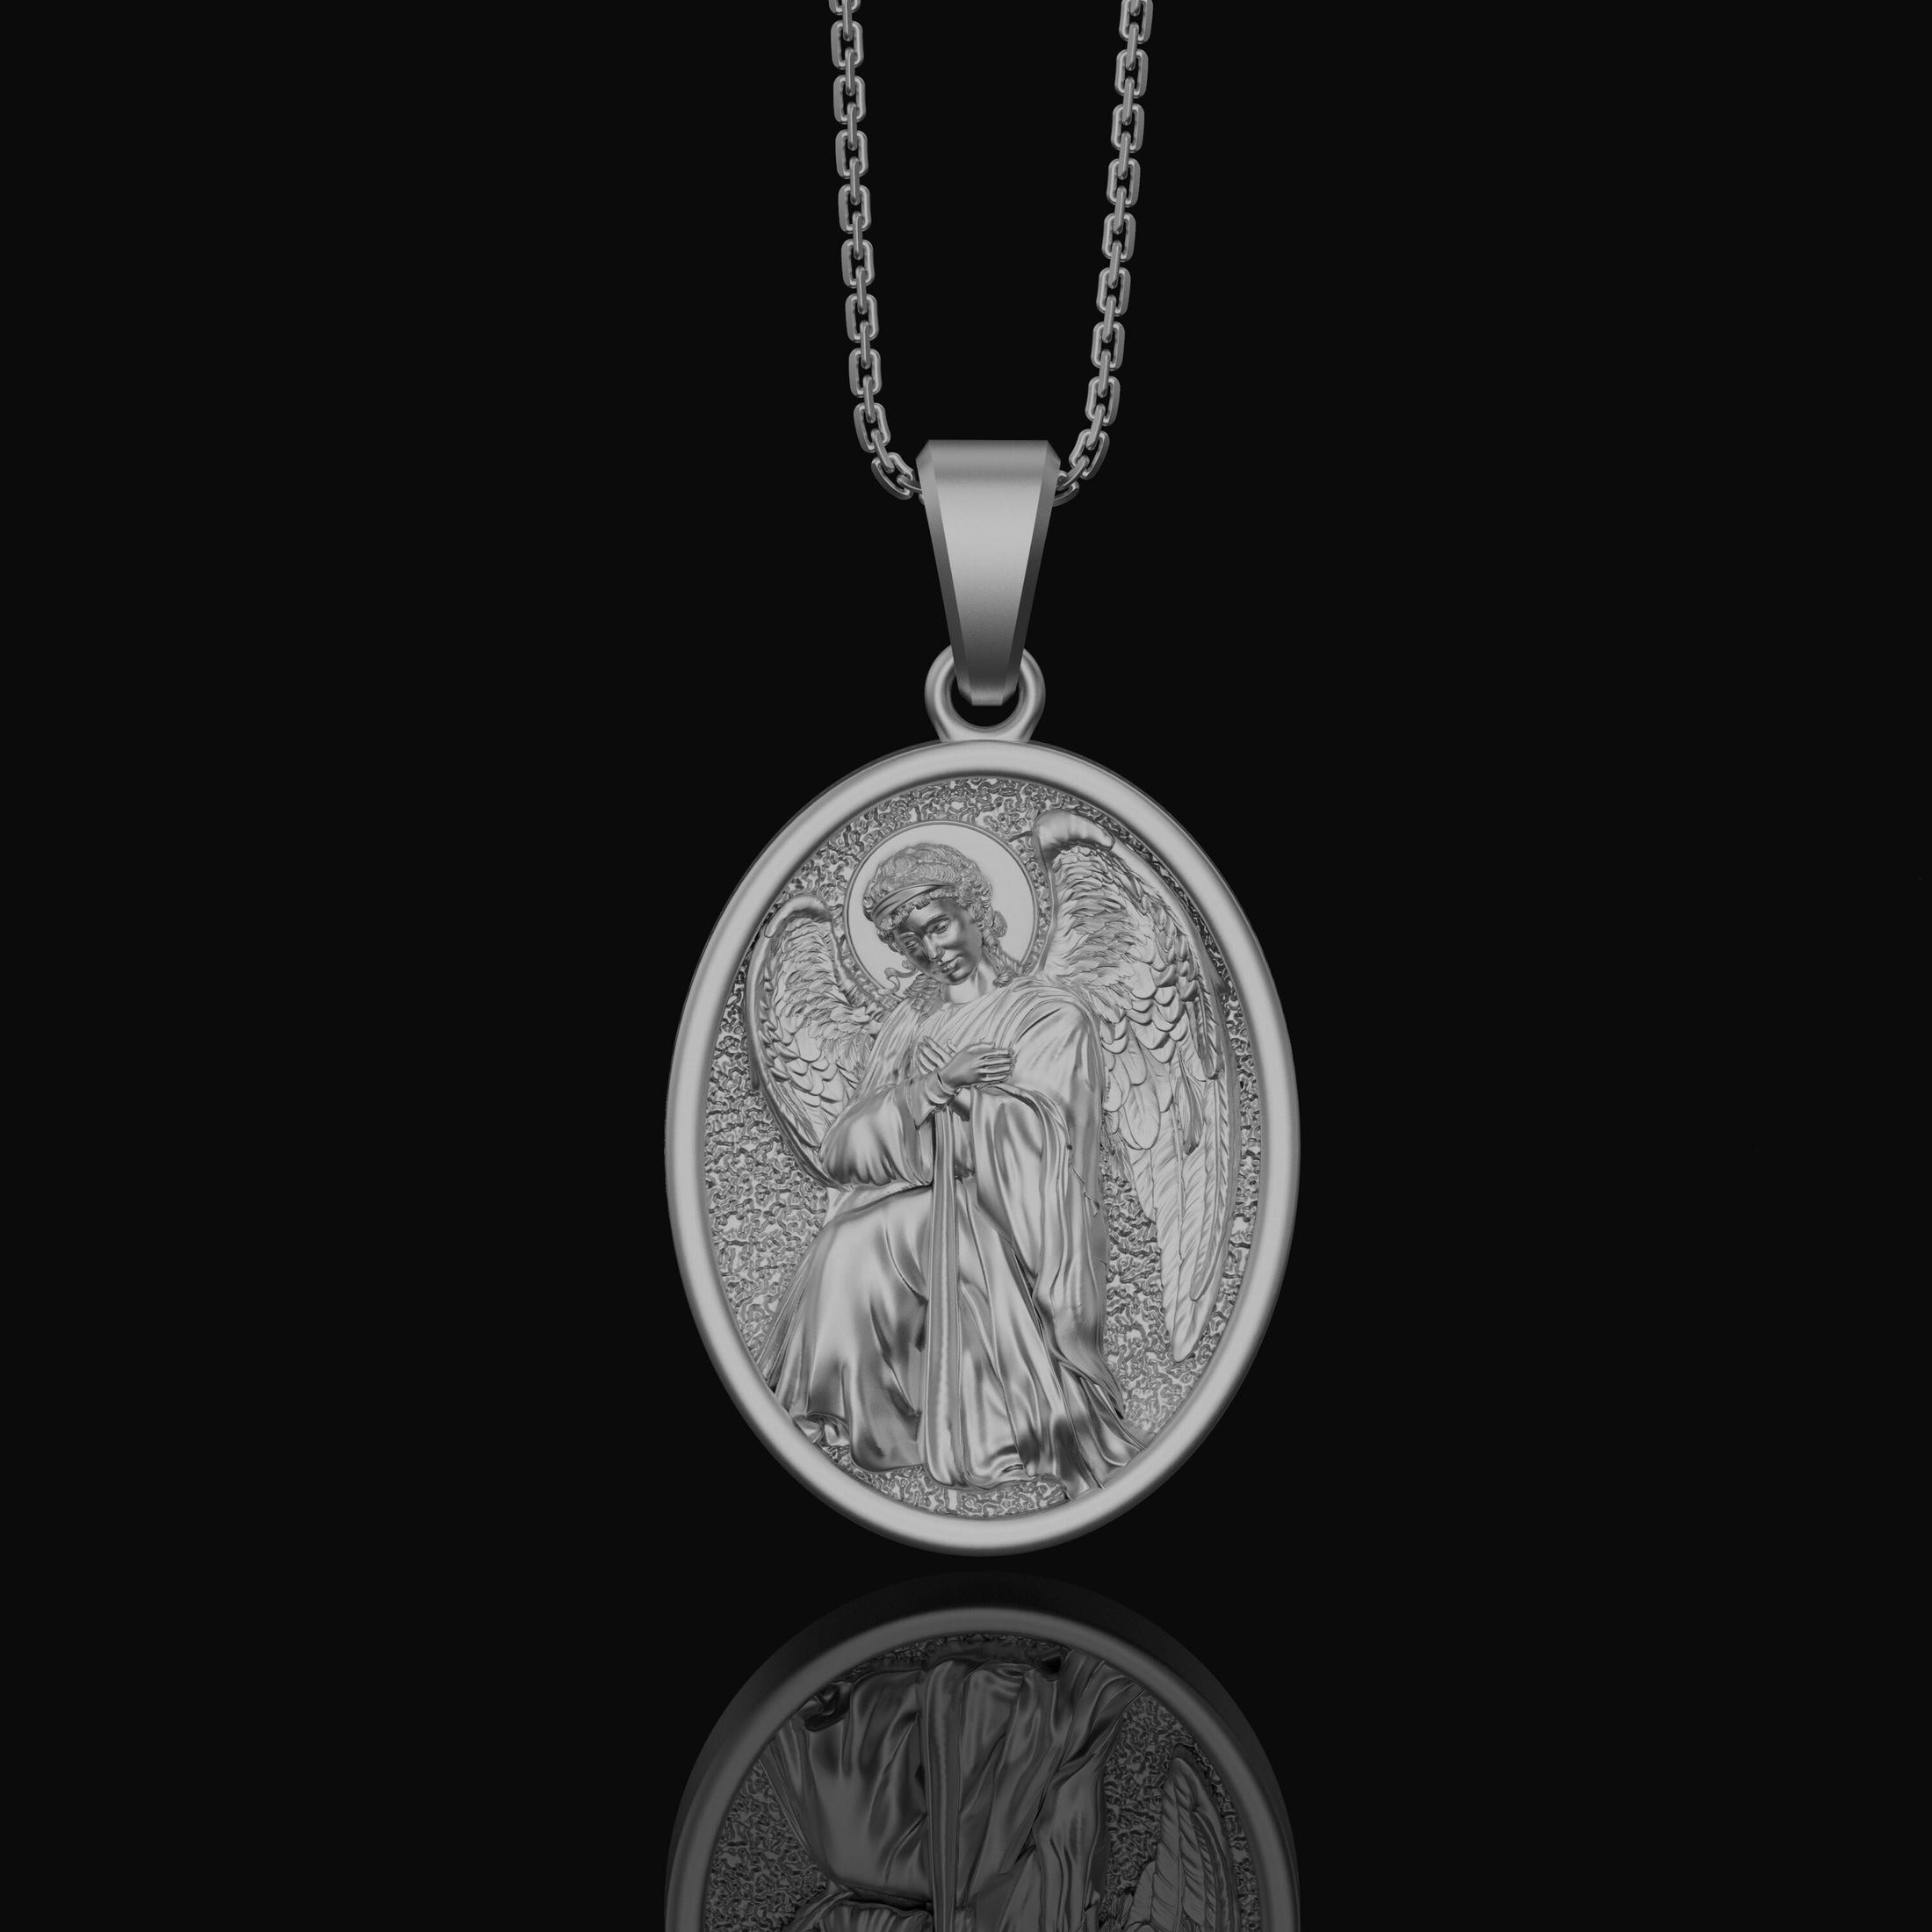 Silver Archangel Gabriel Pendant - Guardian Angel Gabriel Necklace, Christian Spiritual Jewelry Gift, Protection Gift, Personalized